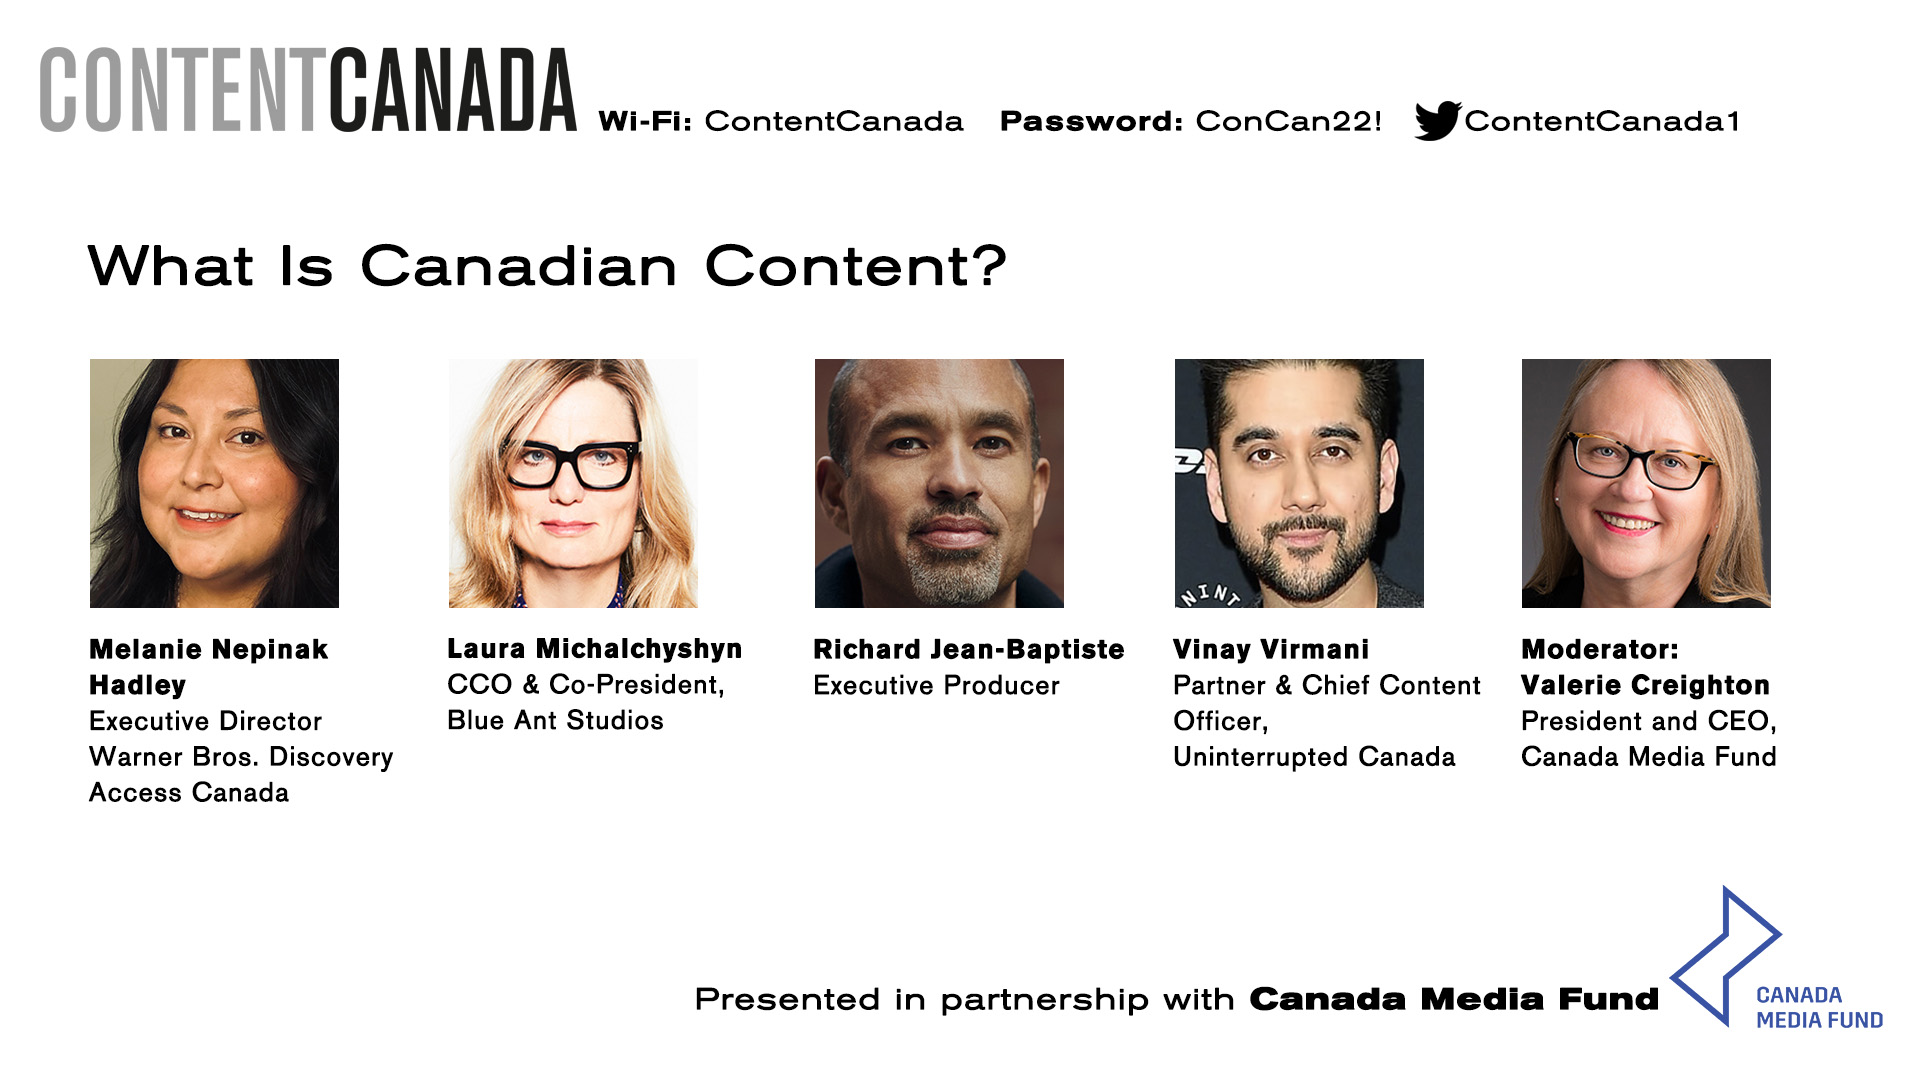 What Is Canadian Content?